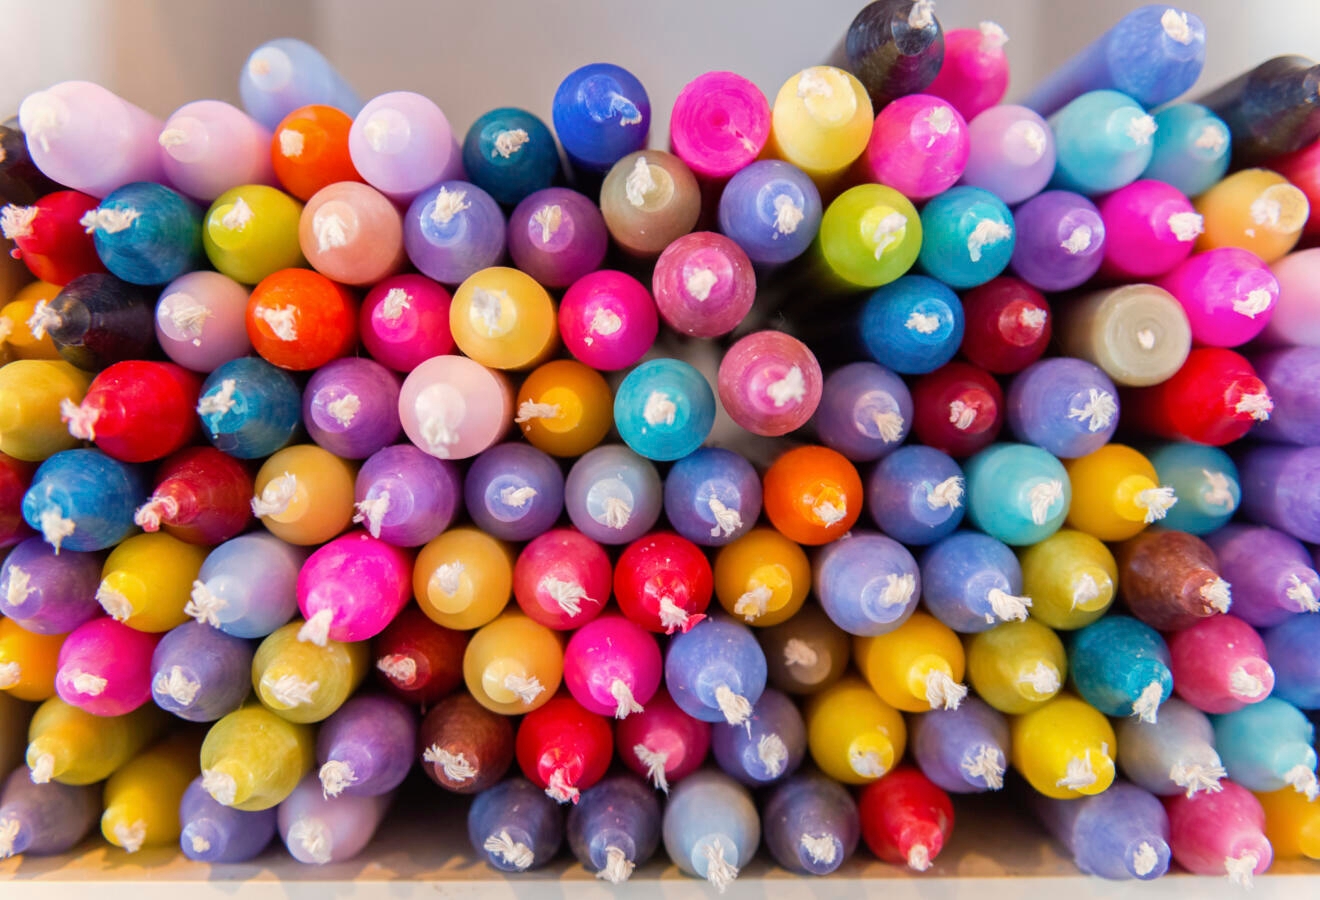 photograph of a bin of colorful candles